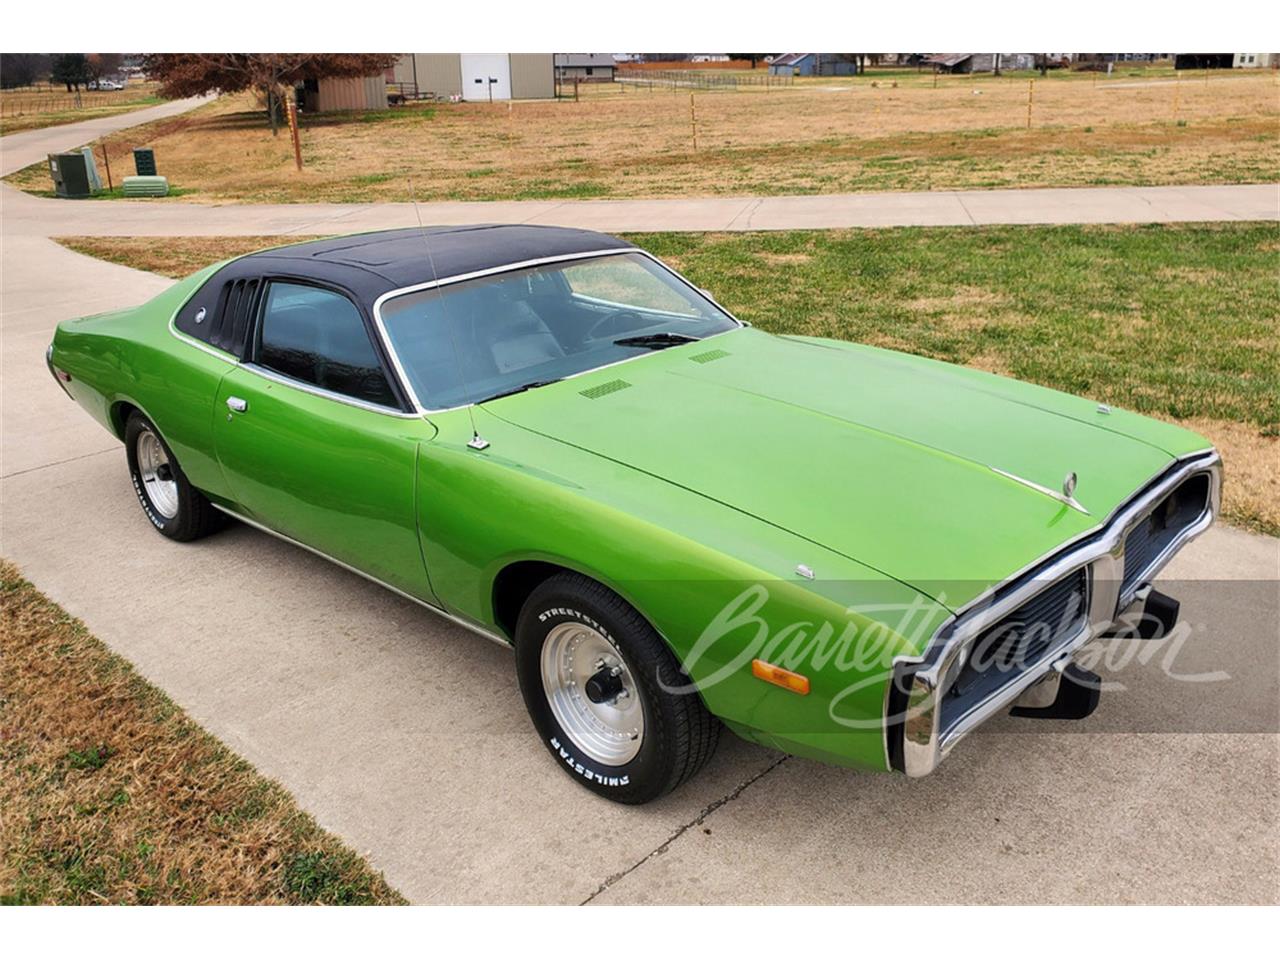 For Sale at Auction: 1973 Dodge Charger in Scottsdale, Arizona for sale in Scottsdale, AZ